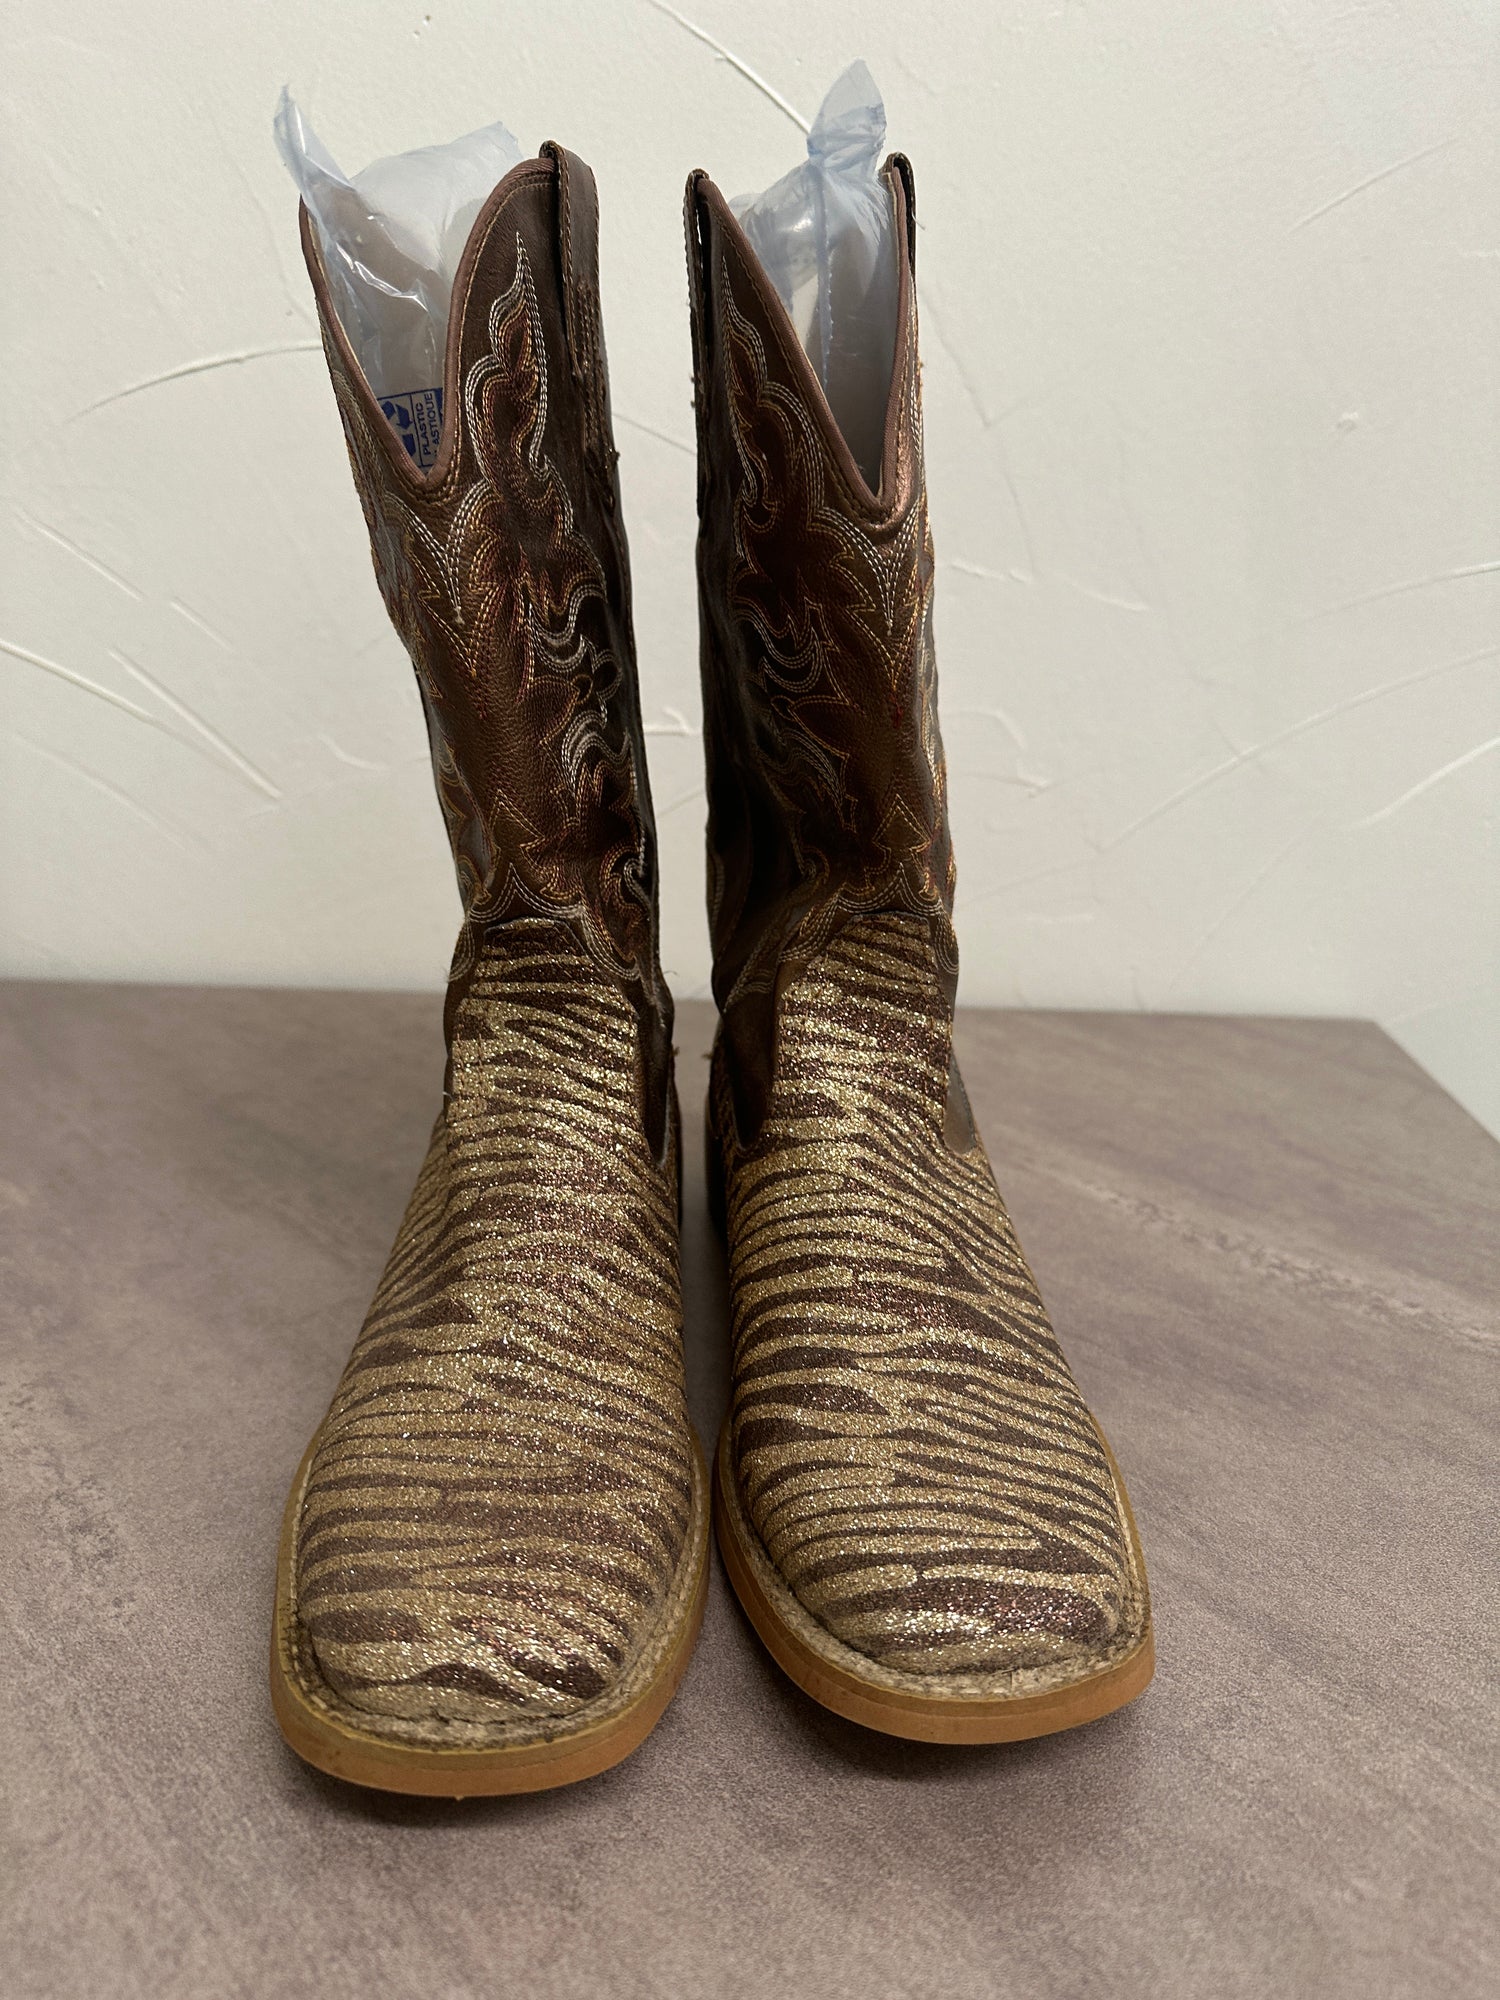 Women's Cowgirl Boots - Roper Size 7